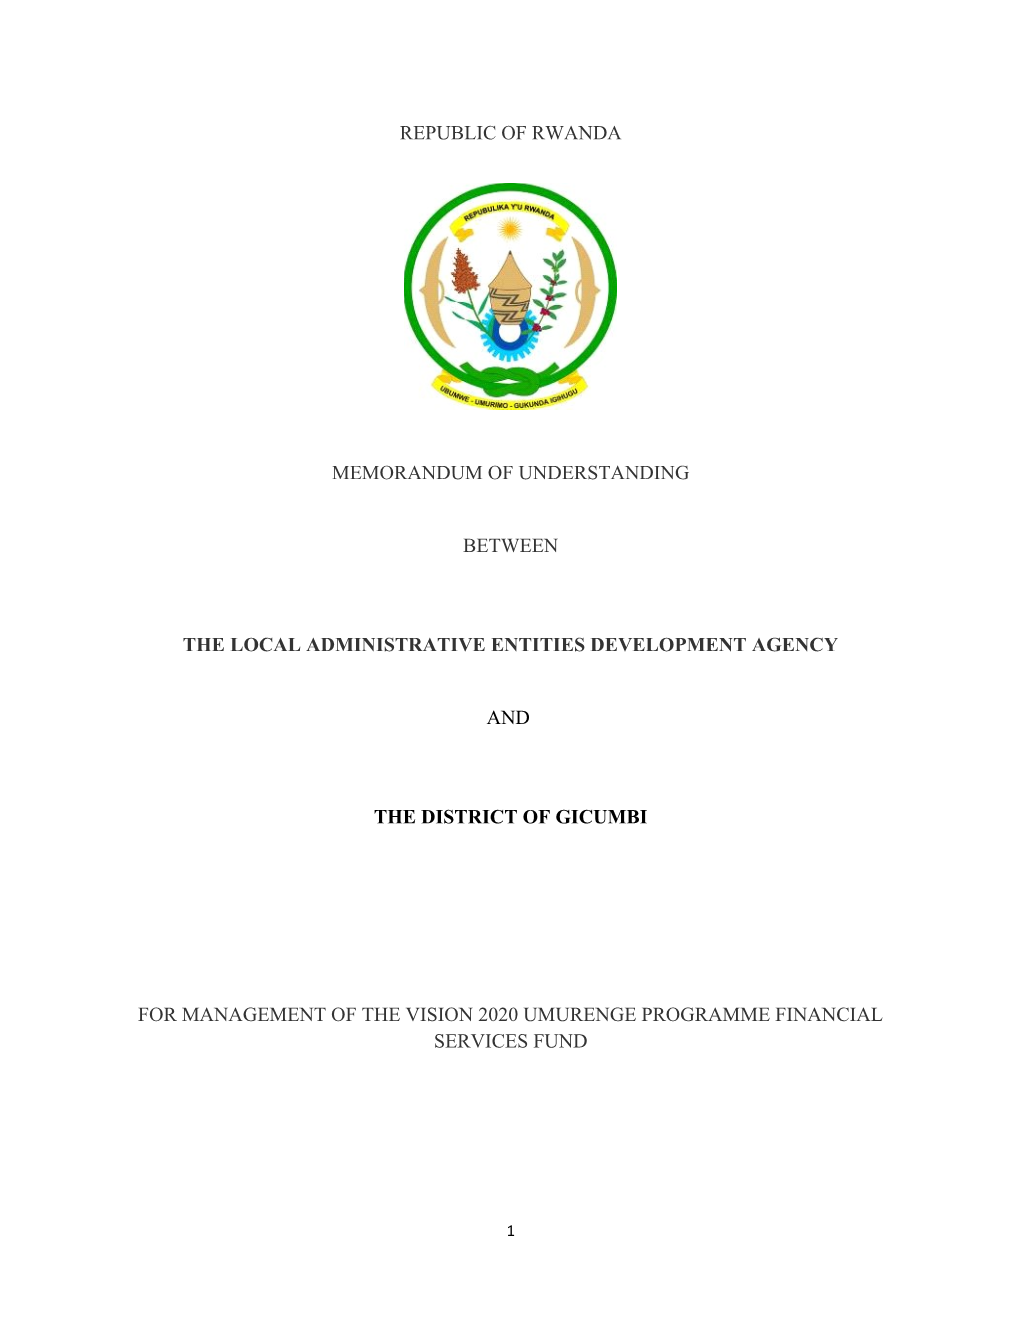 The Local Administrative Entities Development Agency